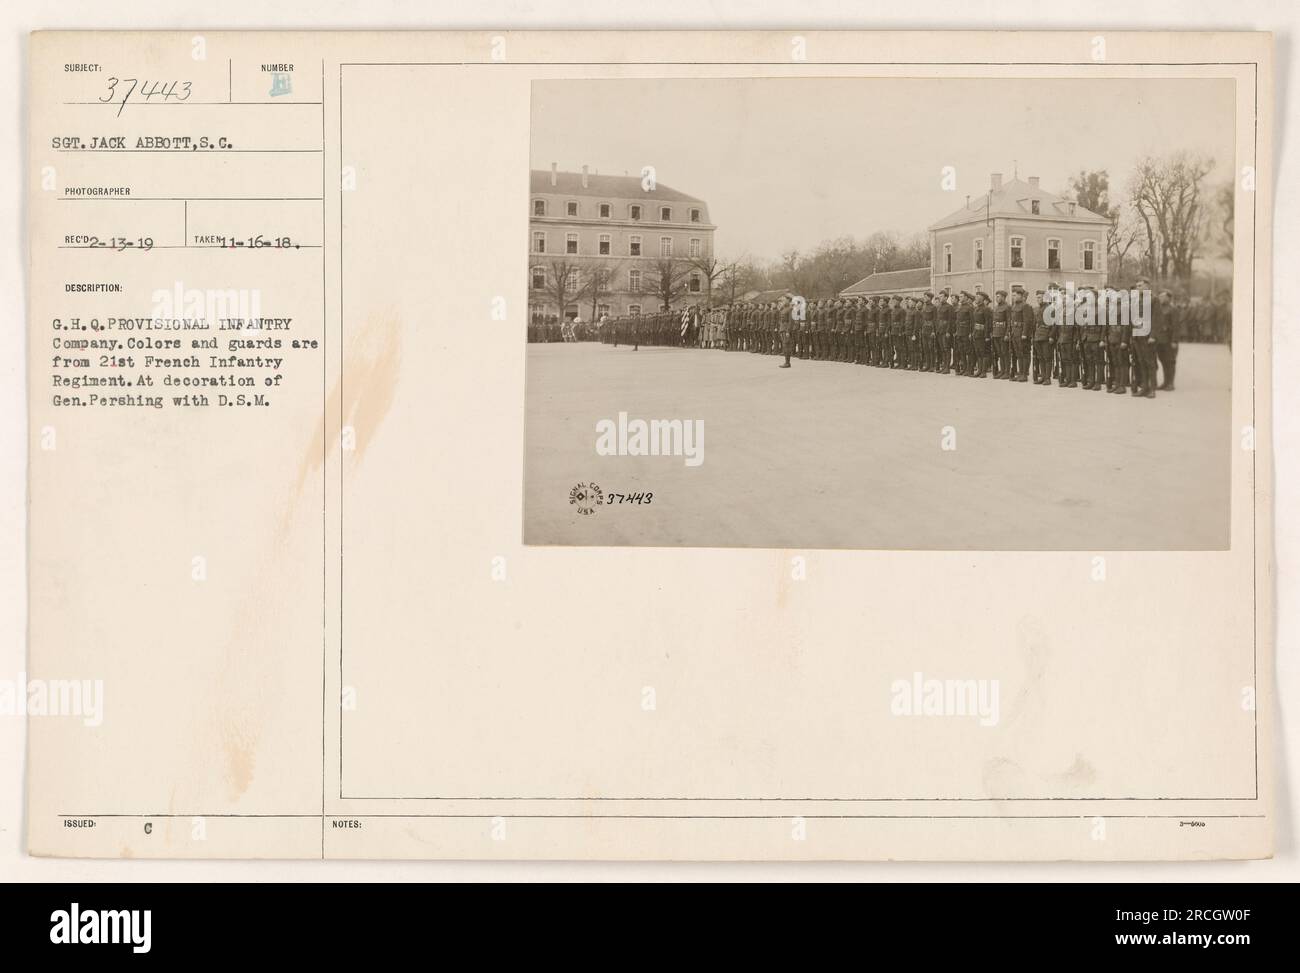 Sergeant Jack Abbott, S.C. photographer, captured this photograph (number 37443) on February 13, 1919. It shows the 21st French Infantry Regiment guarding the colors at the decoration ceremony of General Pershing with the Distinguished Service Medal (D.S.M.). Stock Photo